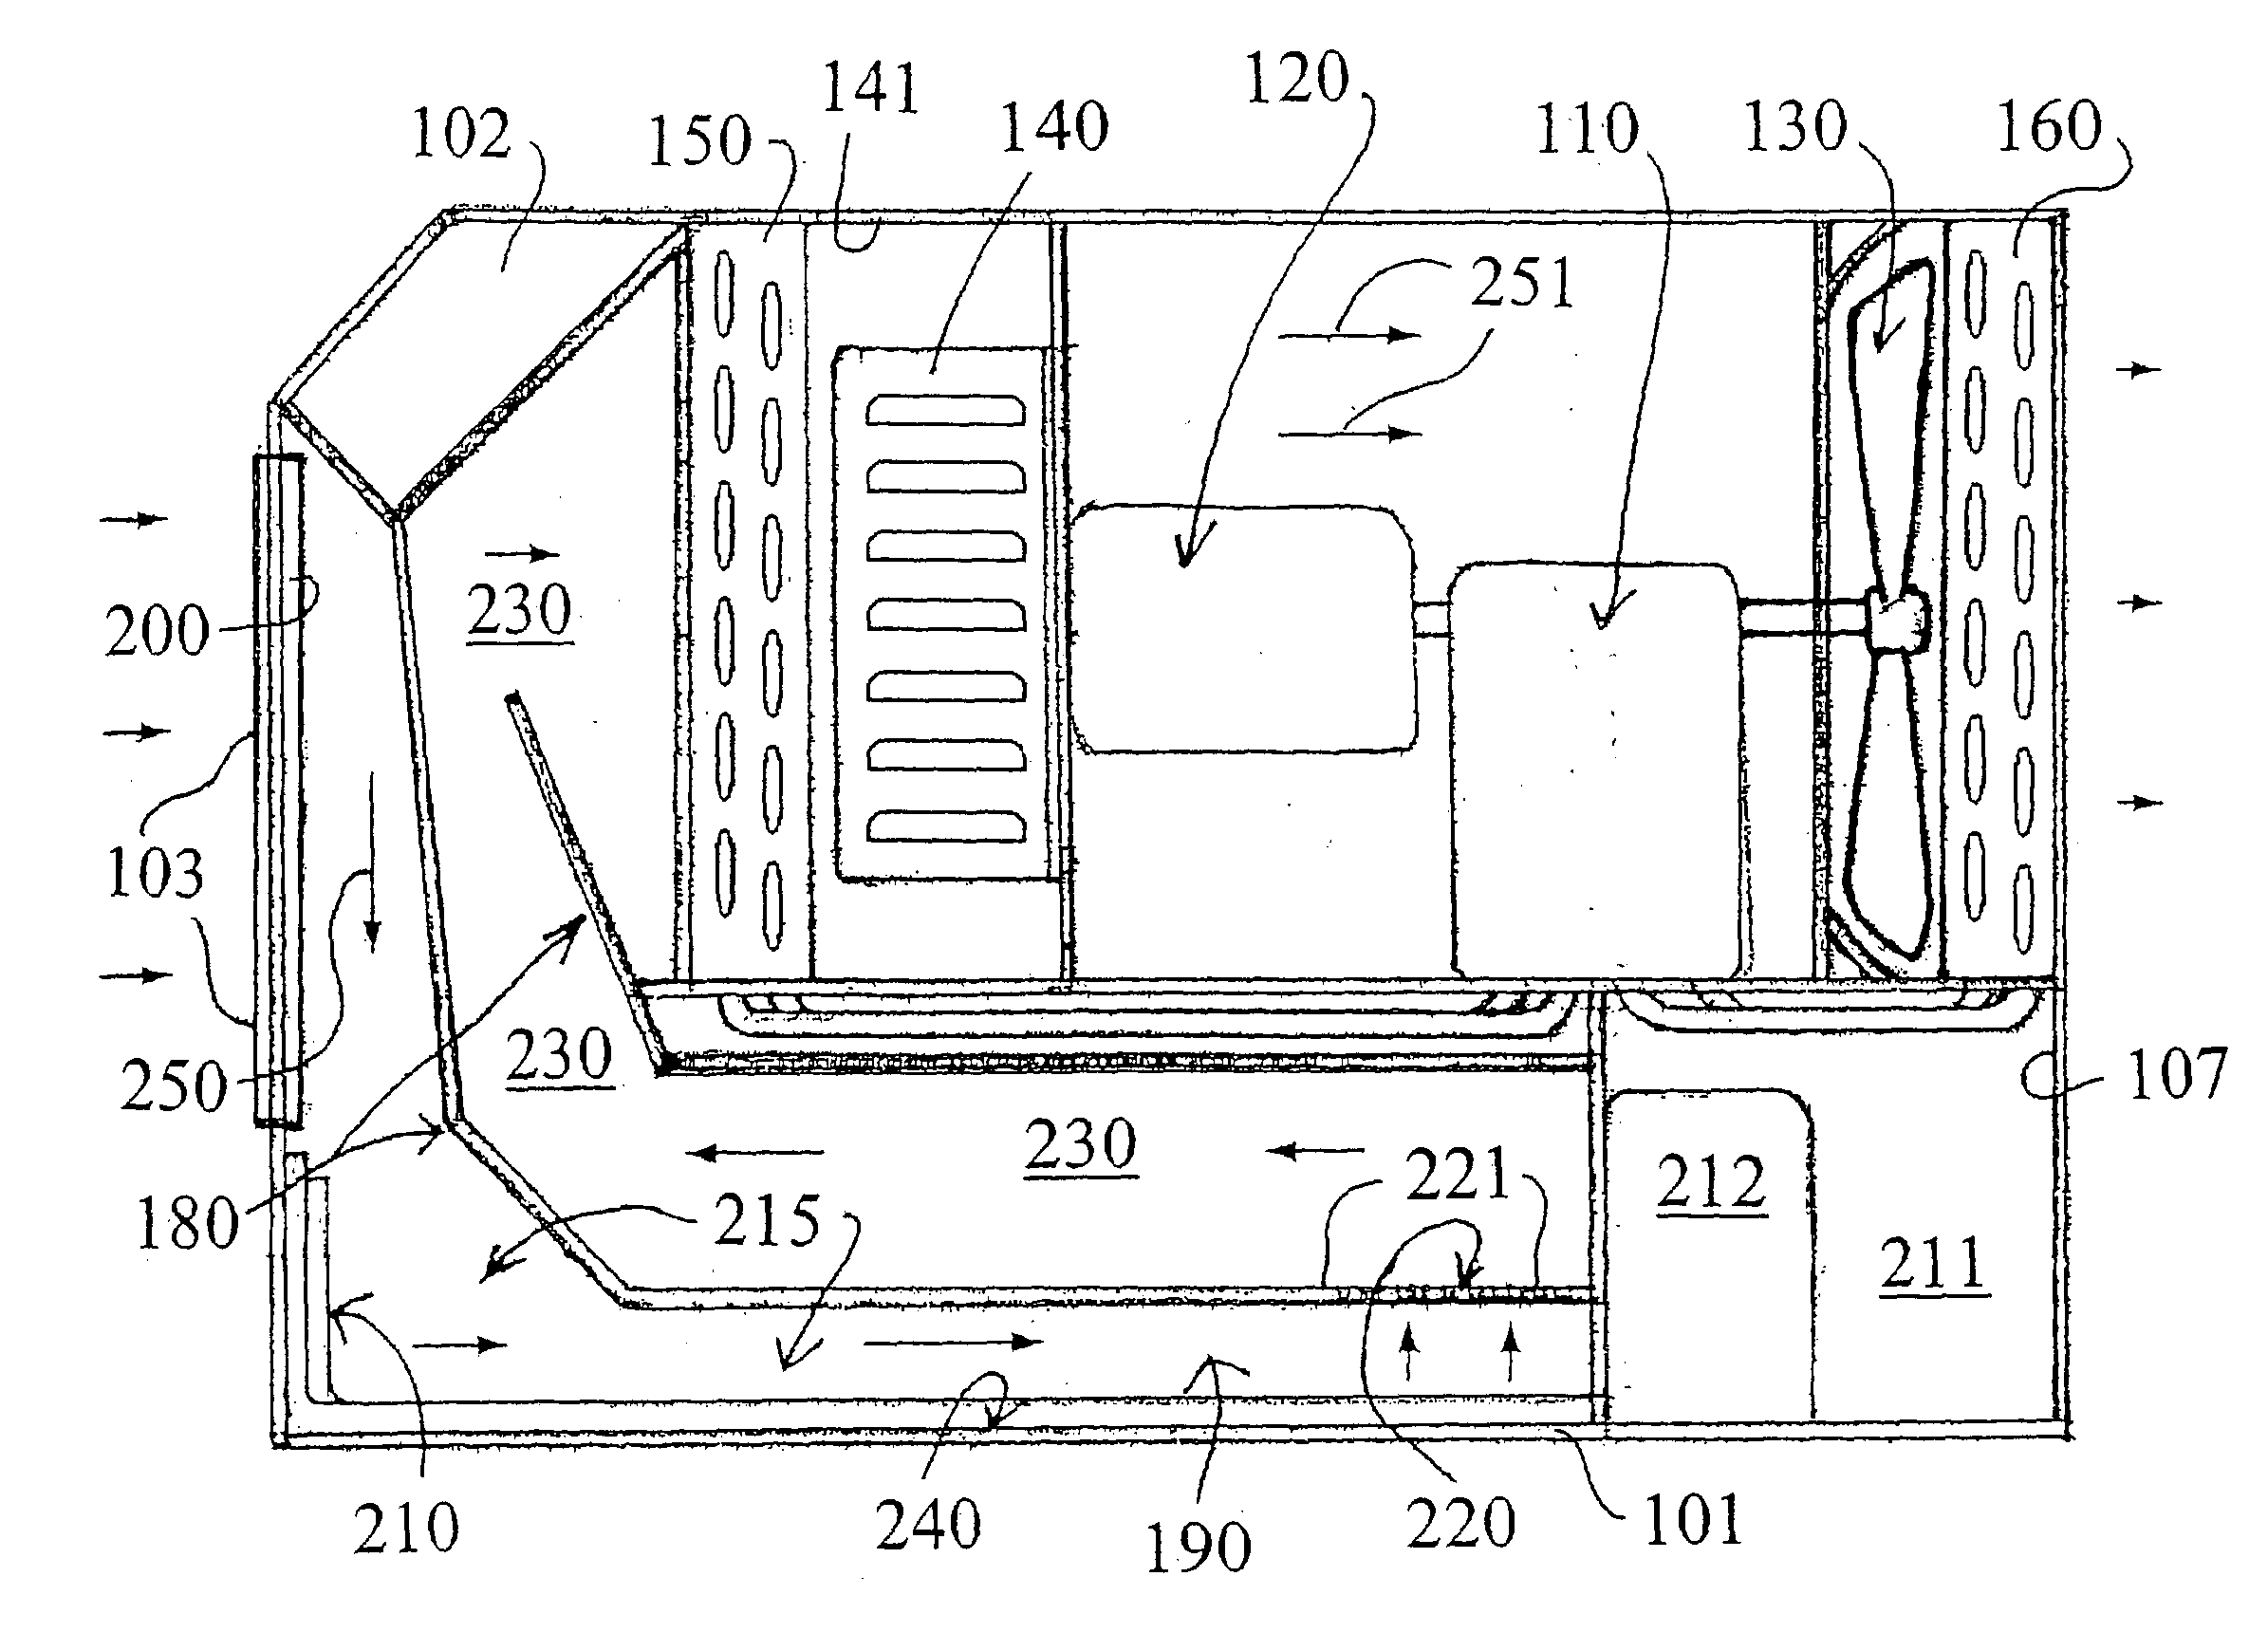 Method and apparatus for filtering an air stream using an aqueous-froth together with nucleation